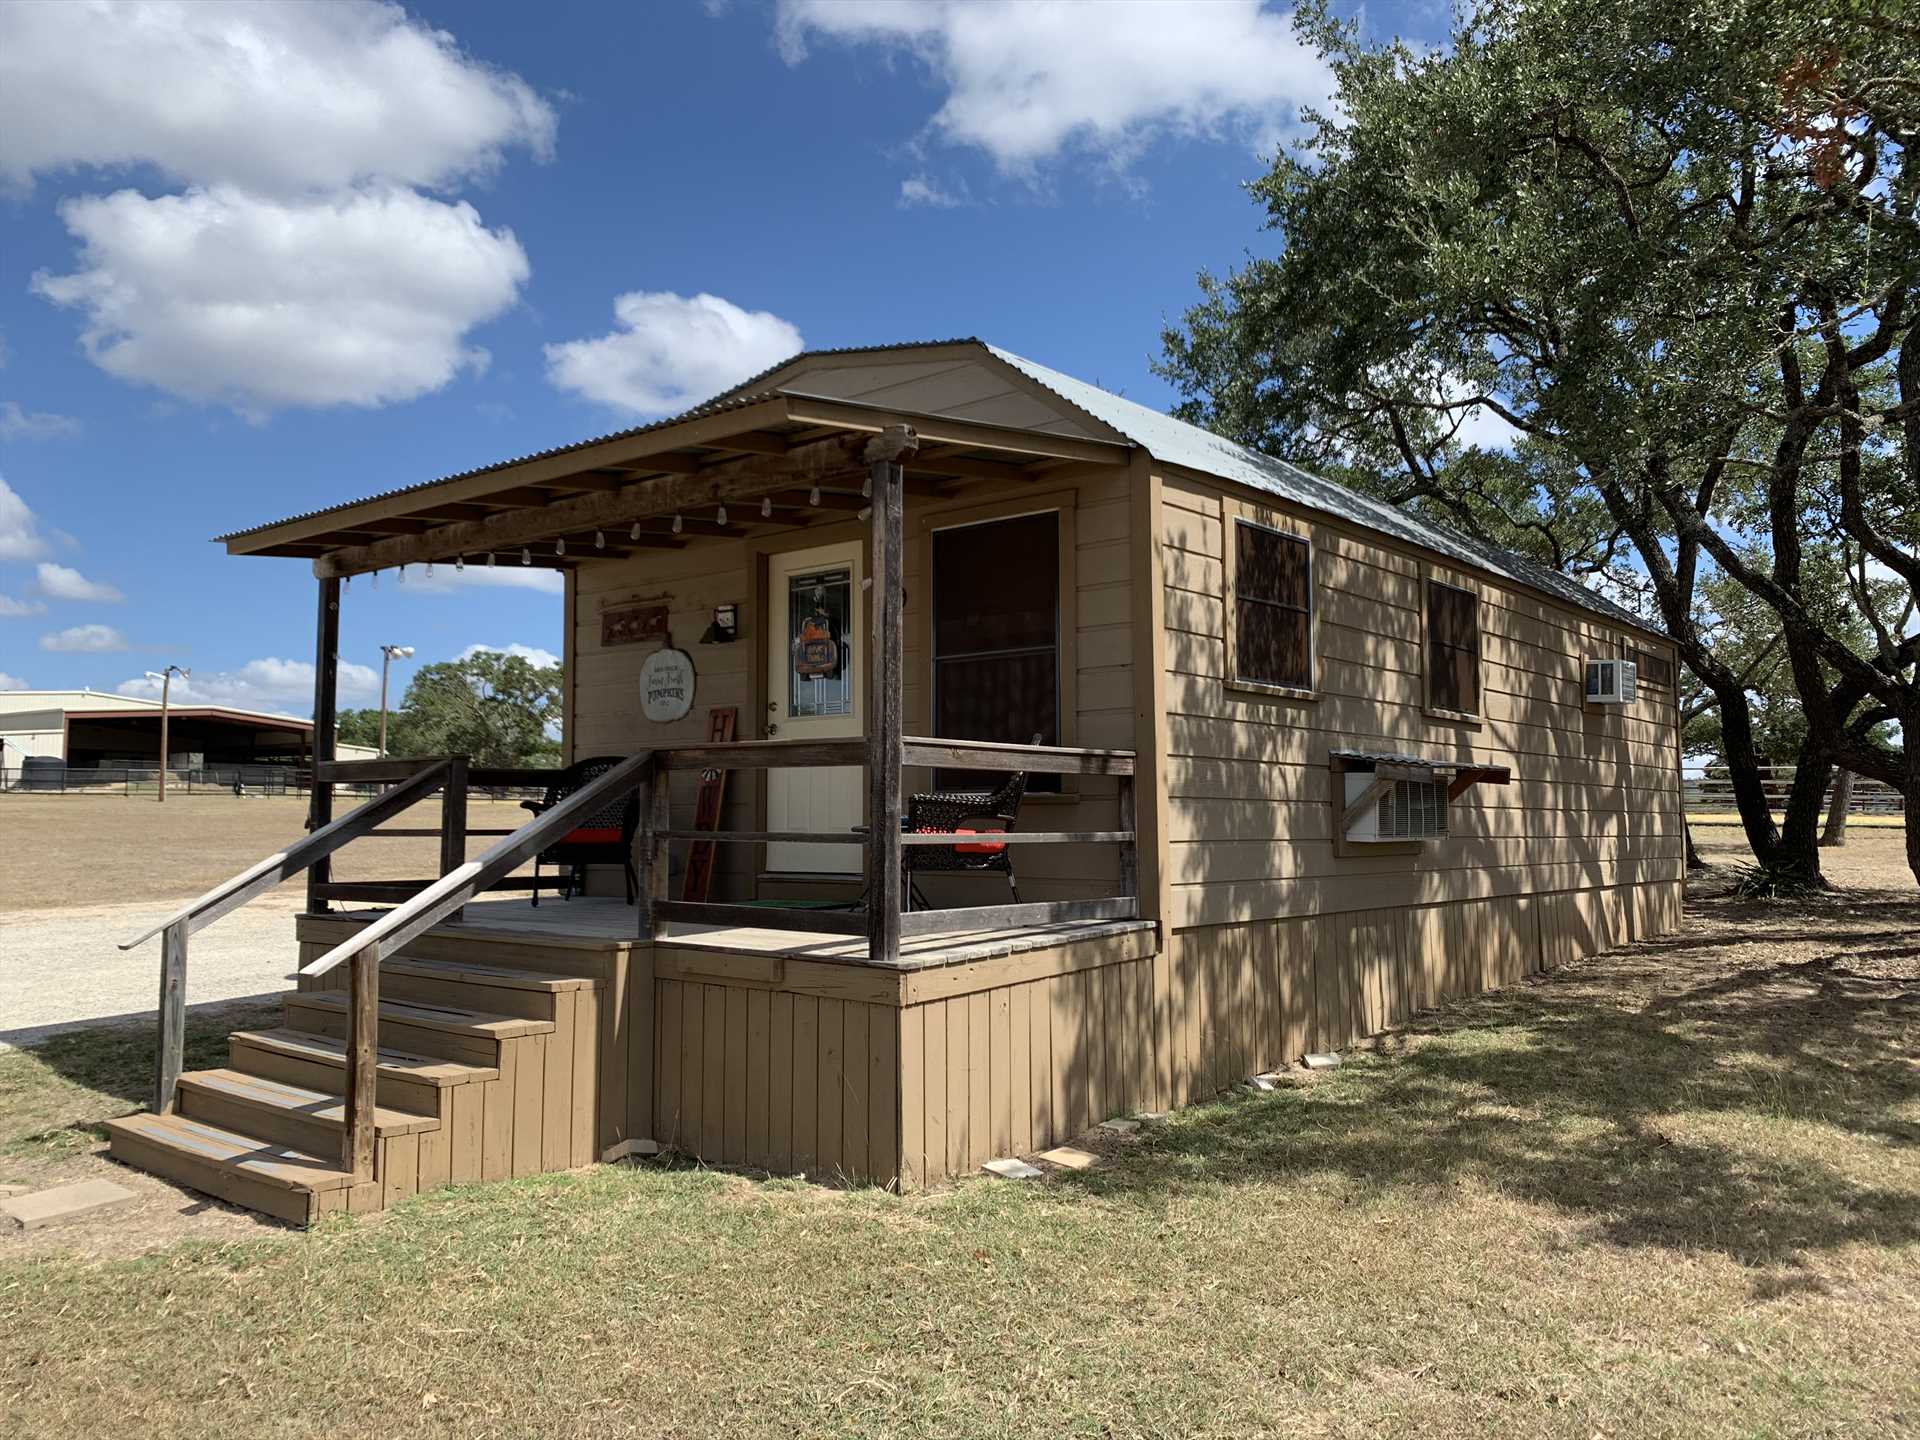                                                 Our recent guest Dolores told us about her stay at this peaceful Hill Country getaway: 